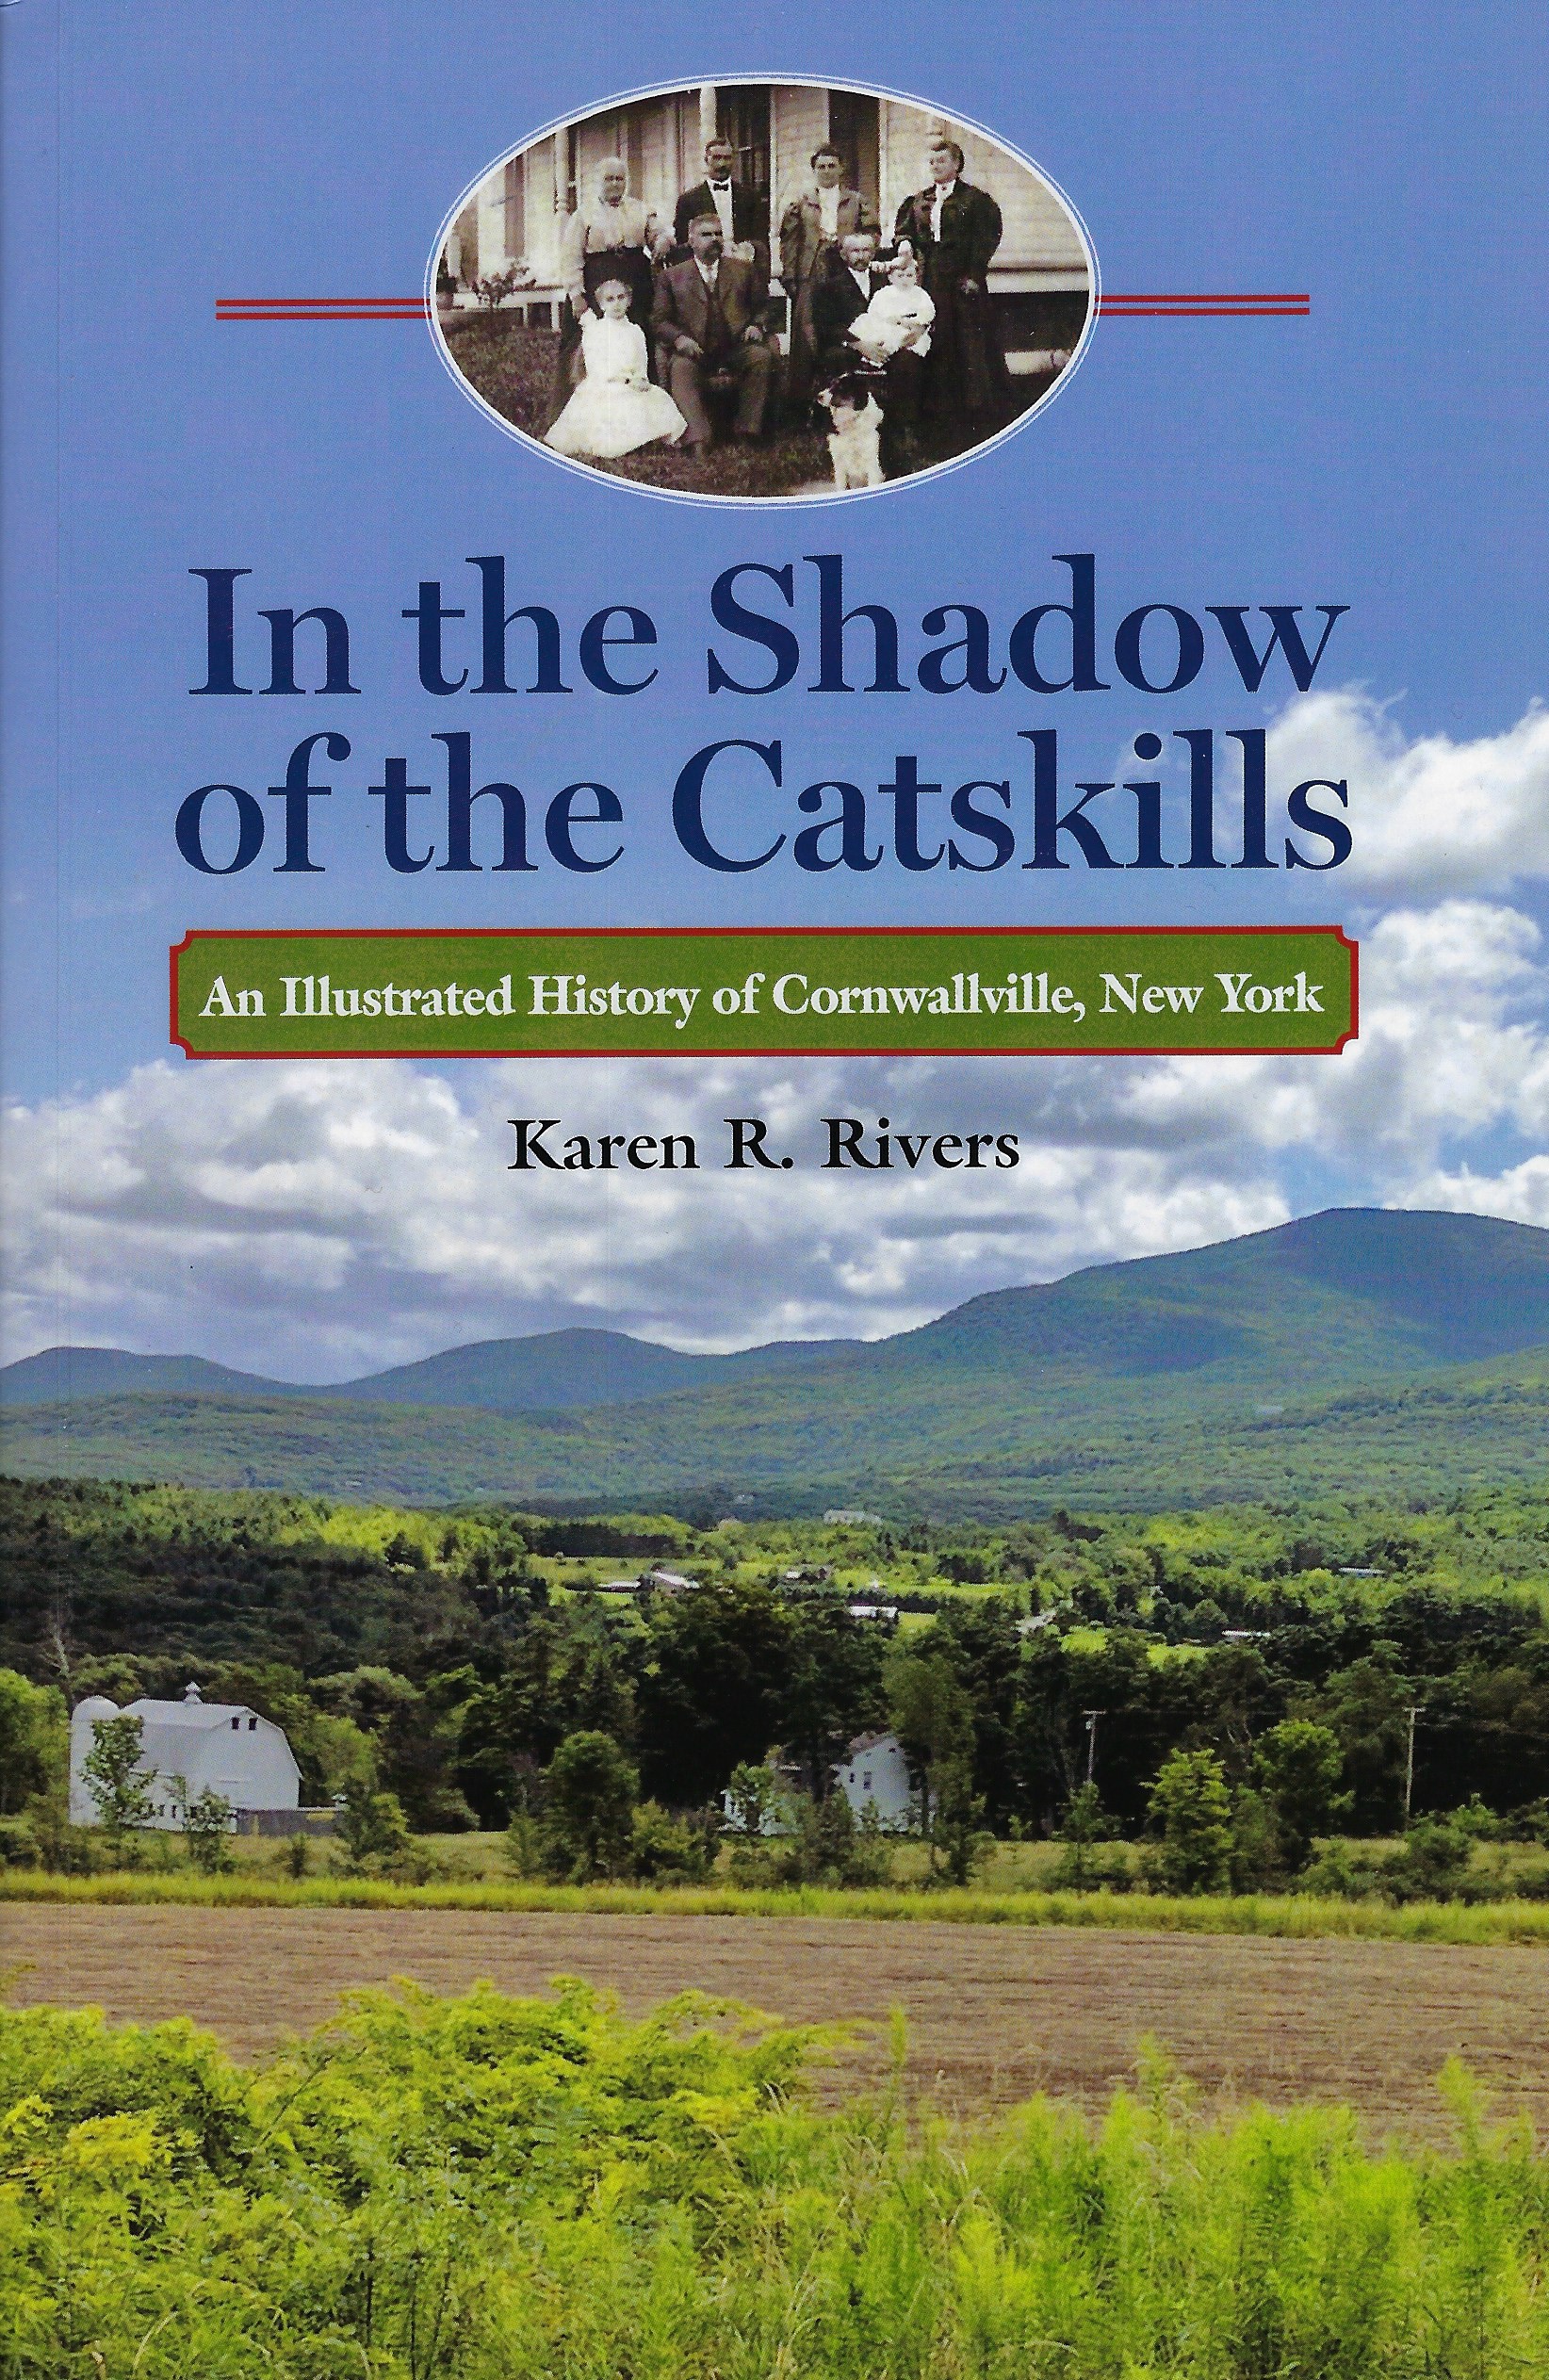 In the Shadow of the Catskills